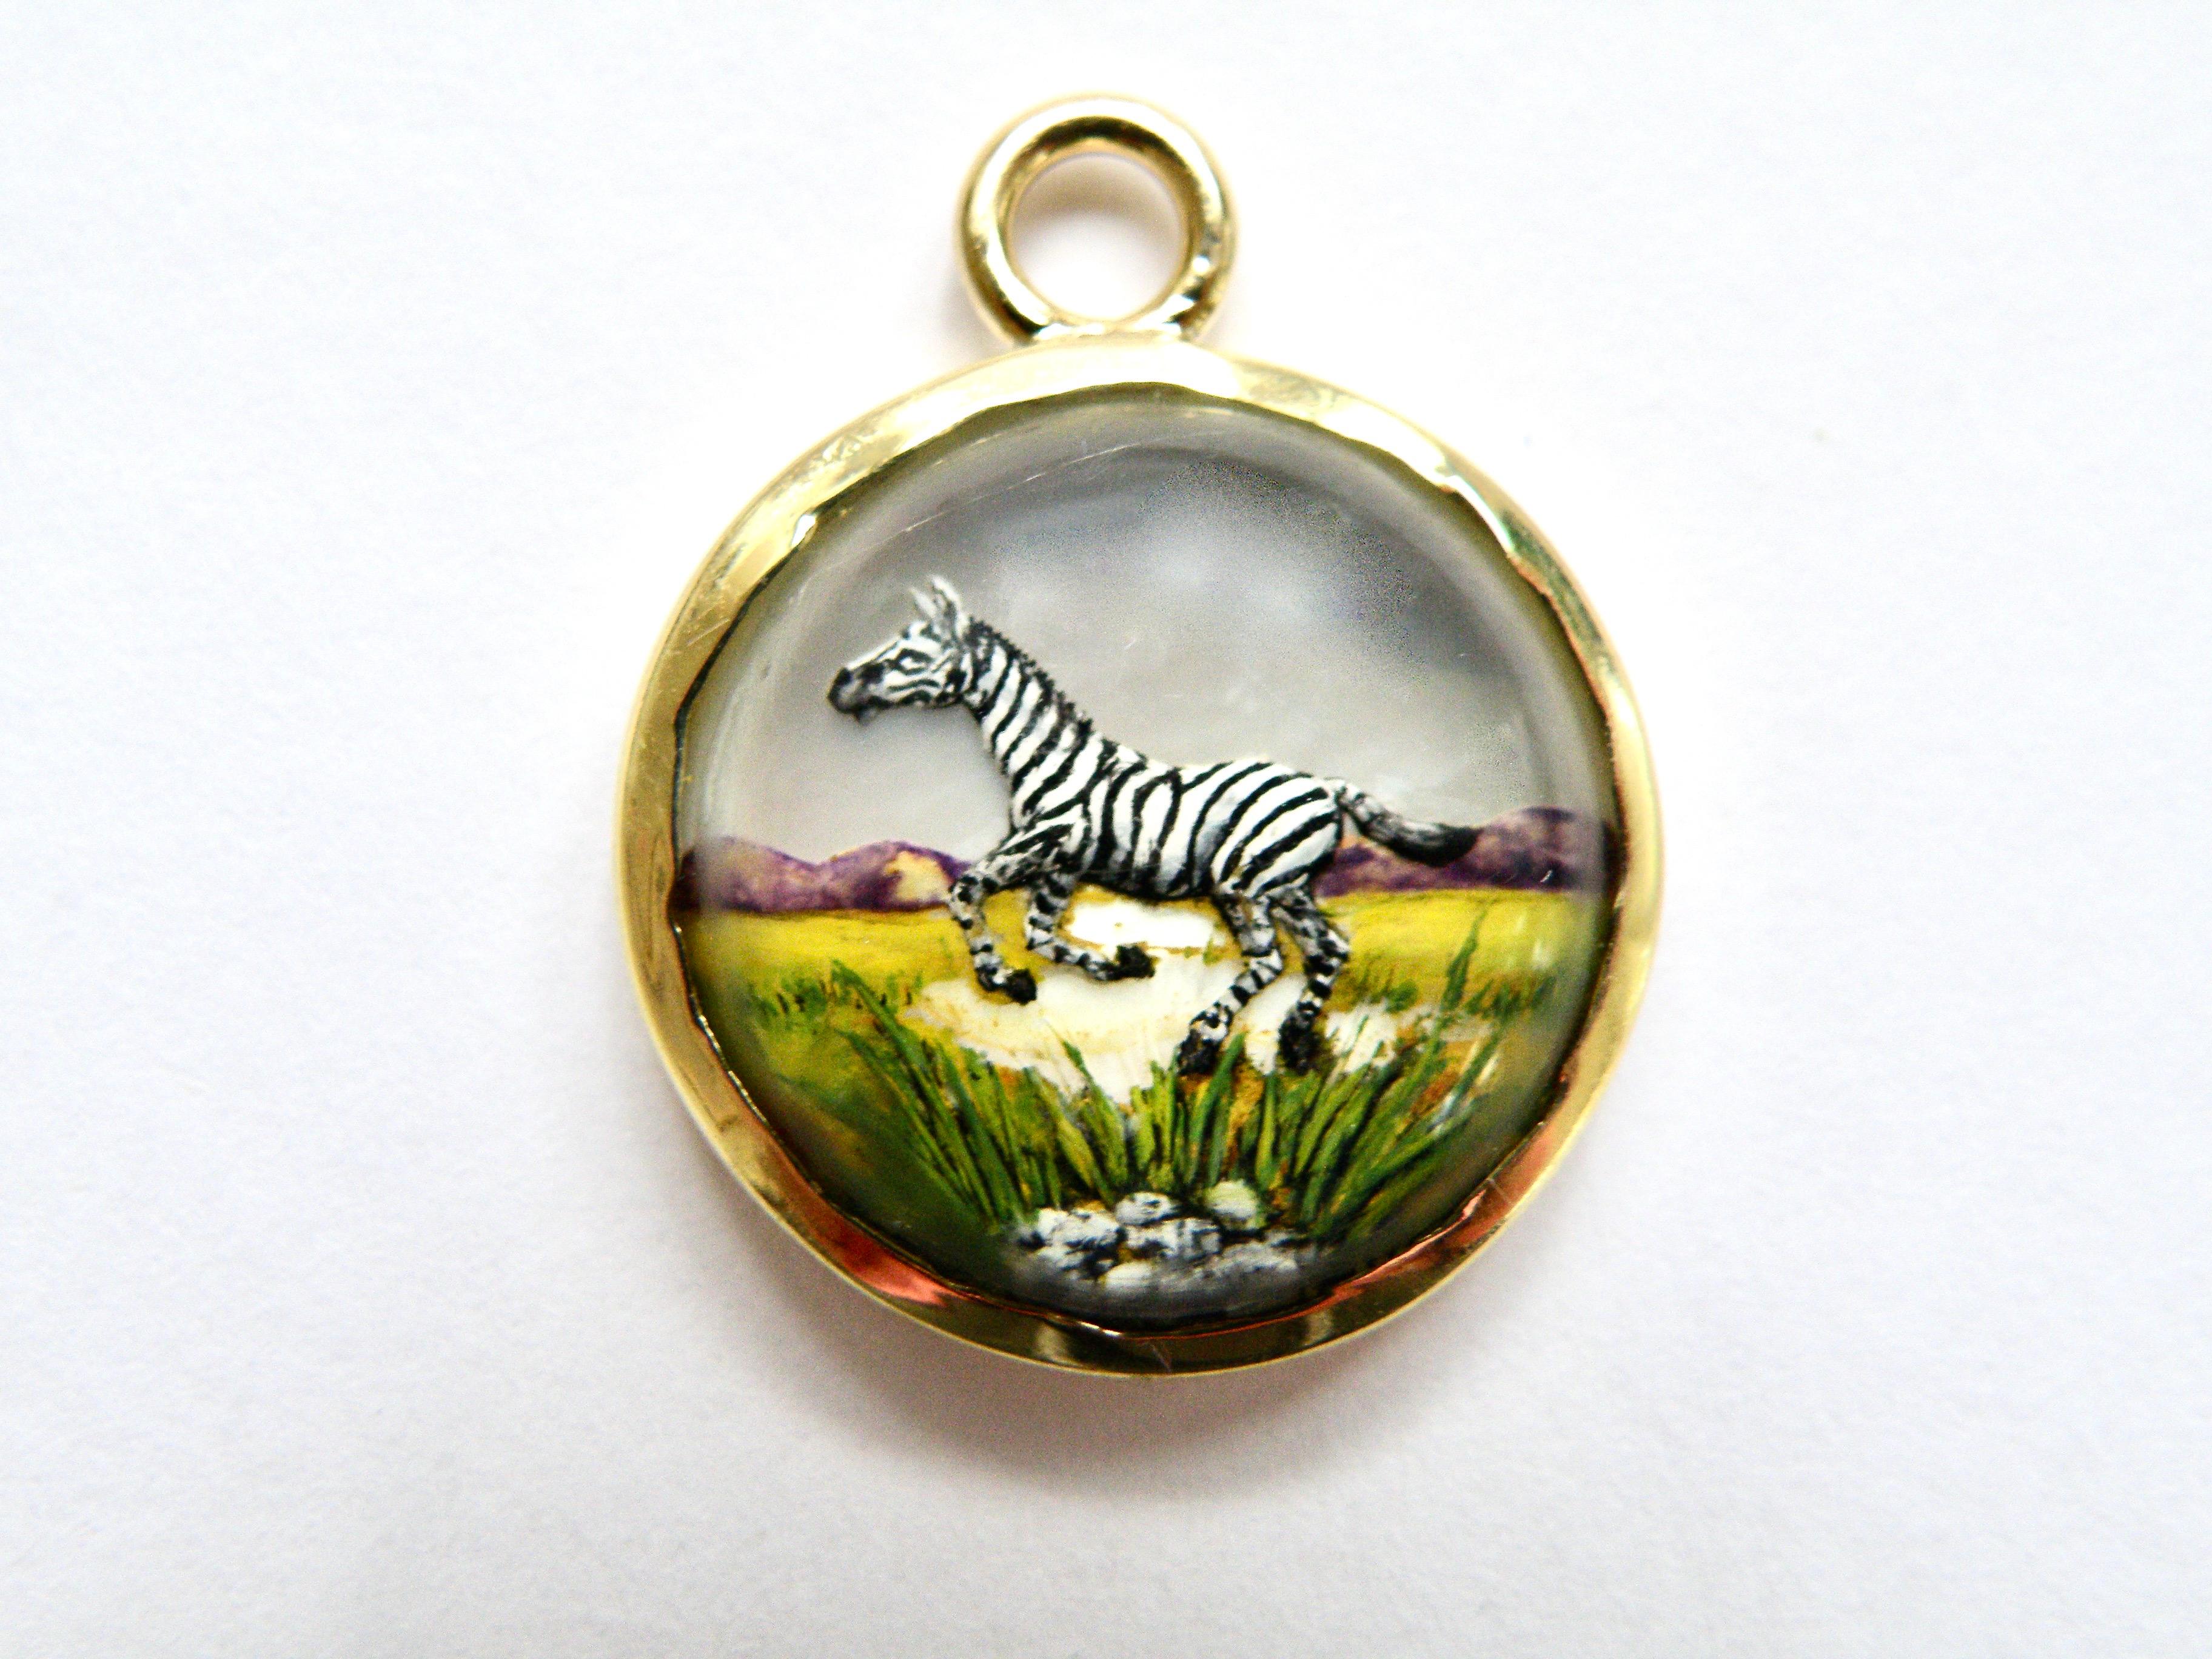 18K zebra pendant hand painted reverse quartz crystal backed with mothher of pearl hand painted by Master Carver from Idar Oberstein 14mm round